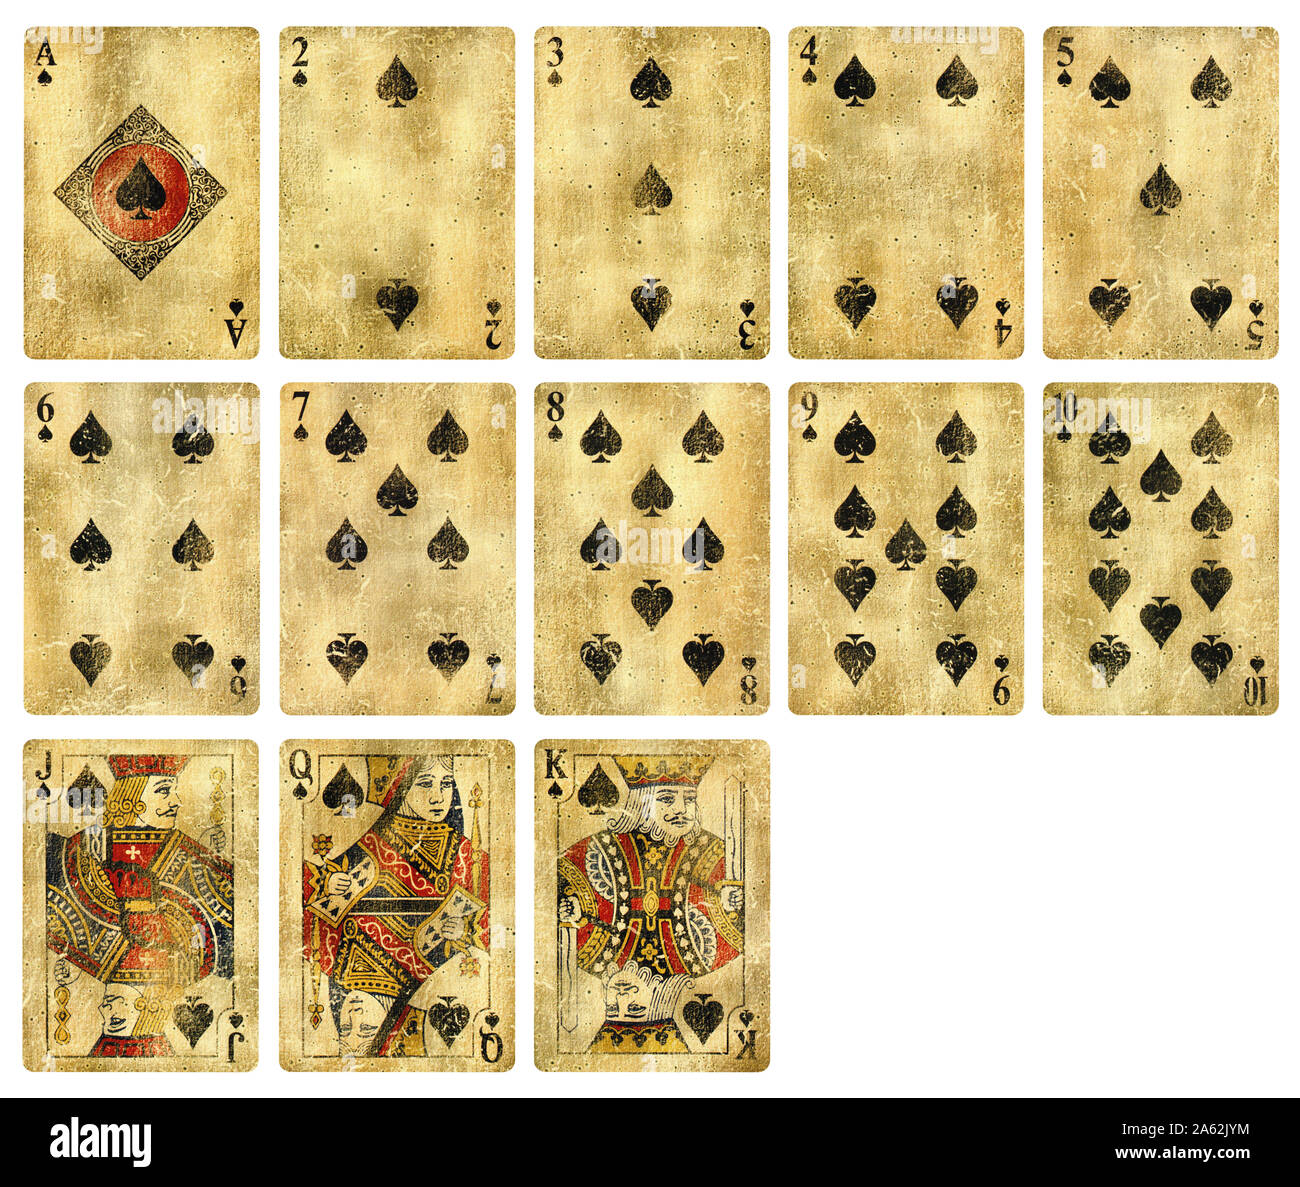 Vintage Playing cards of Spades suit, isolated on white background - High quality. Stock Photo